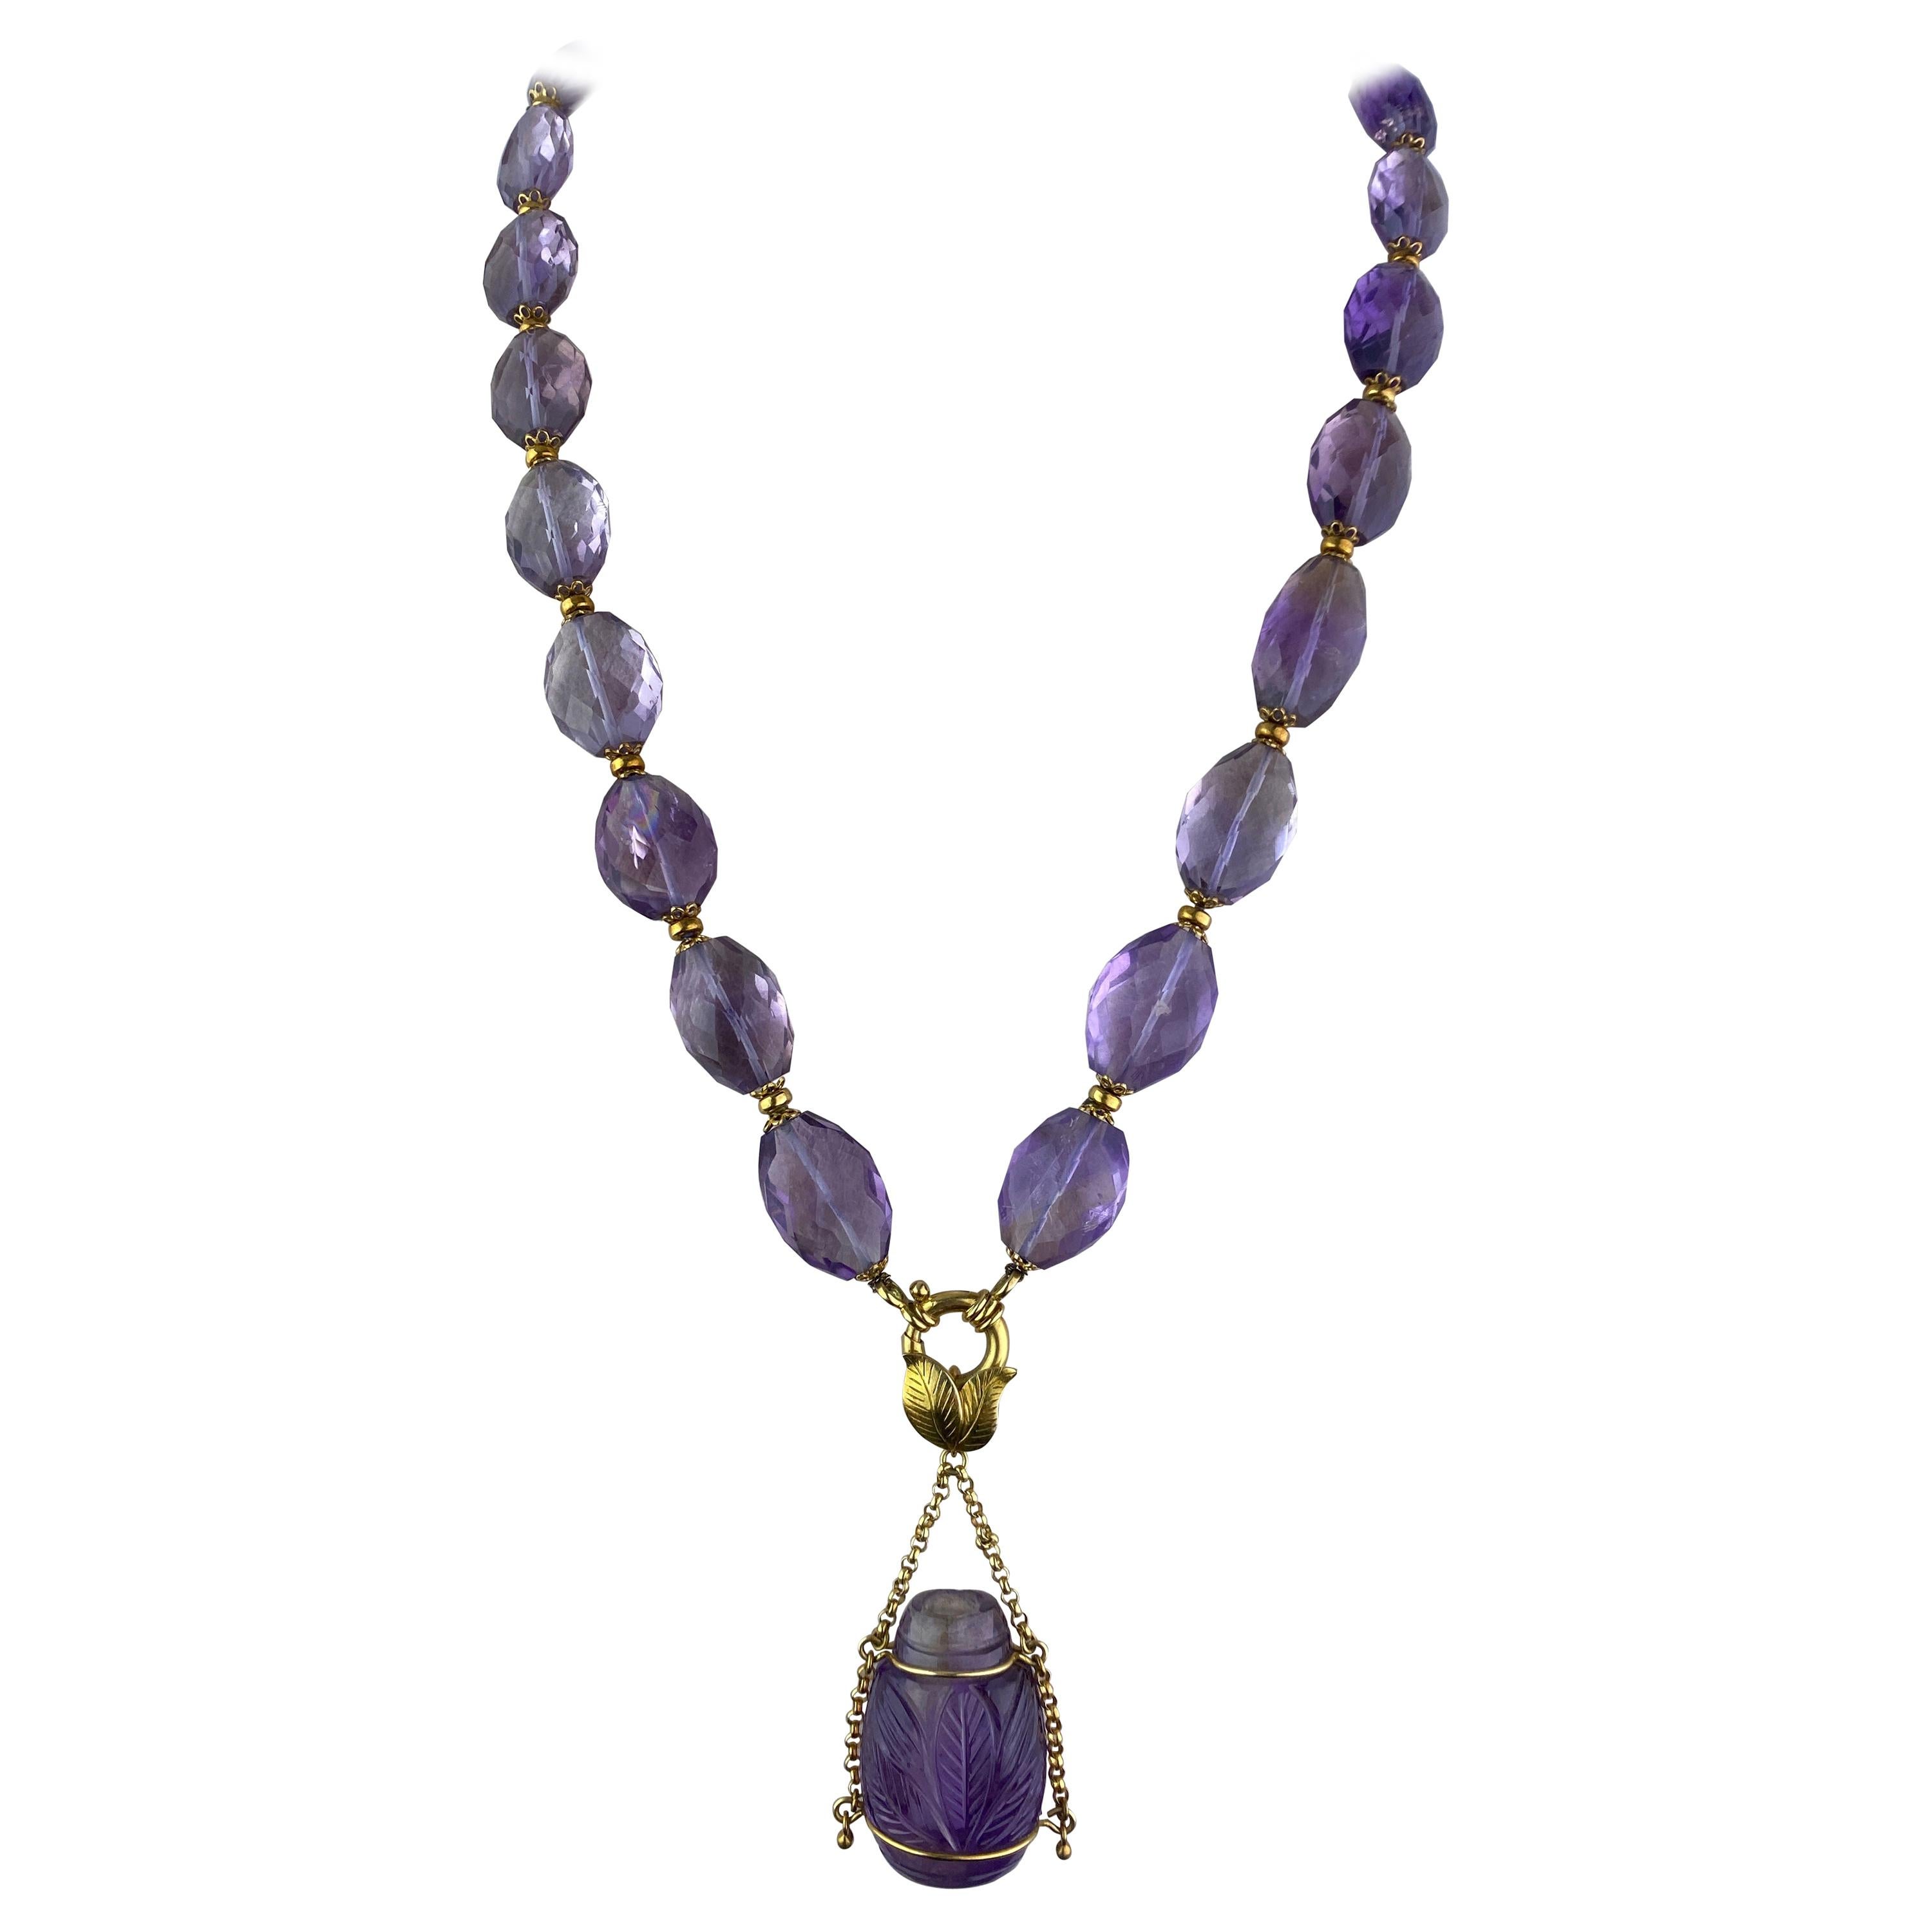 650 Carat Amethyst and Gold Beaded Necklace